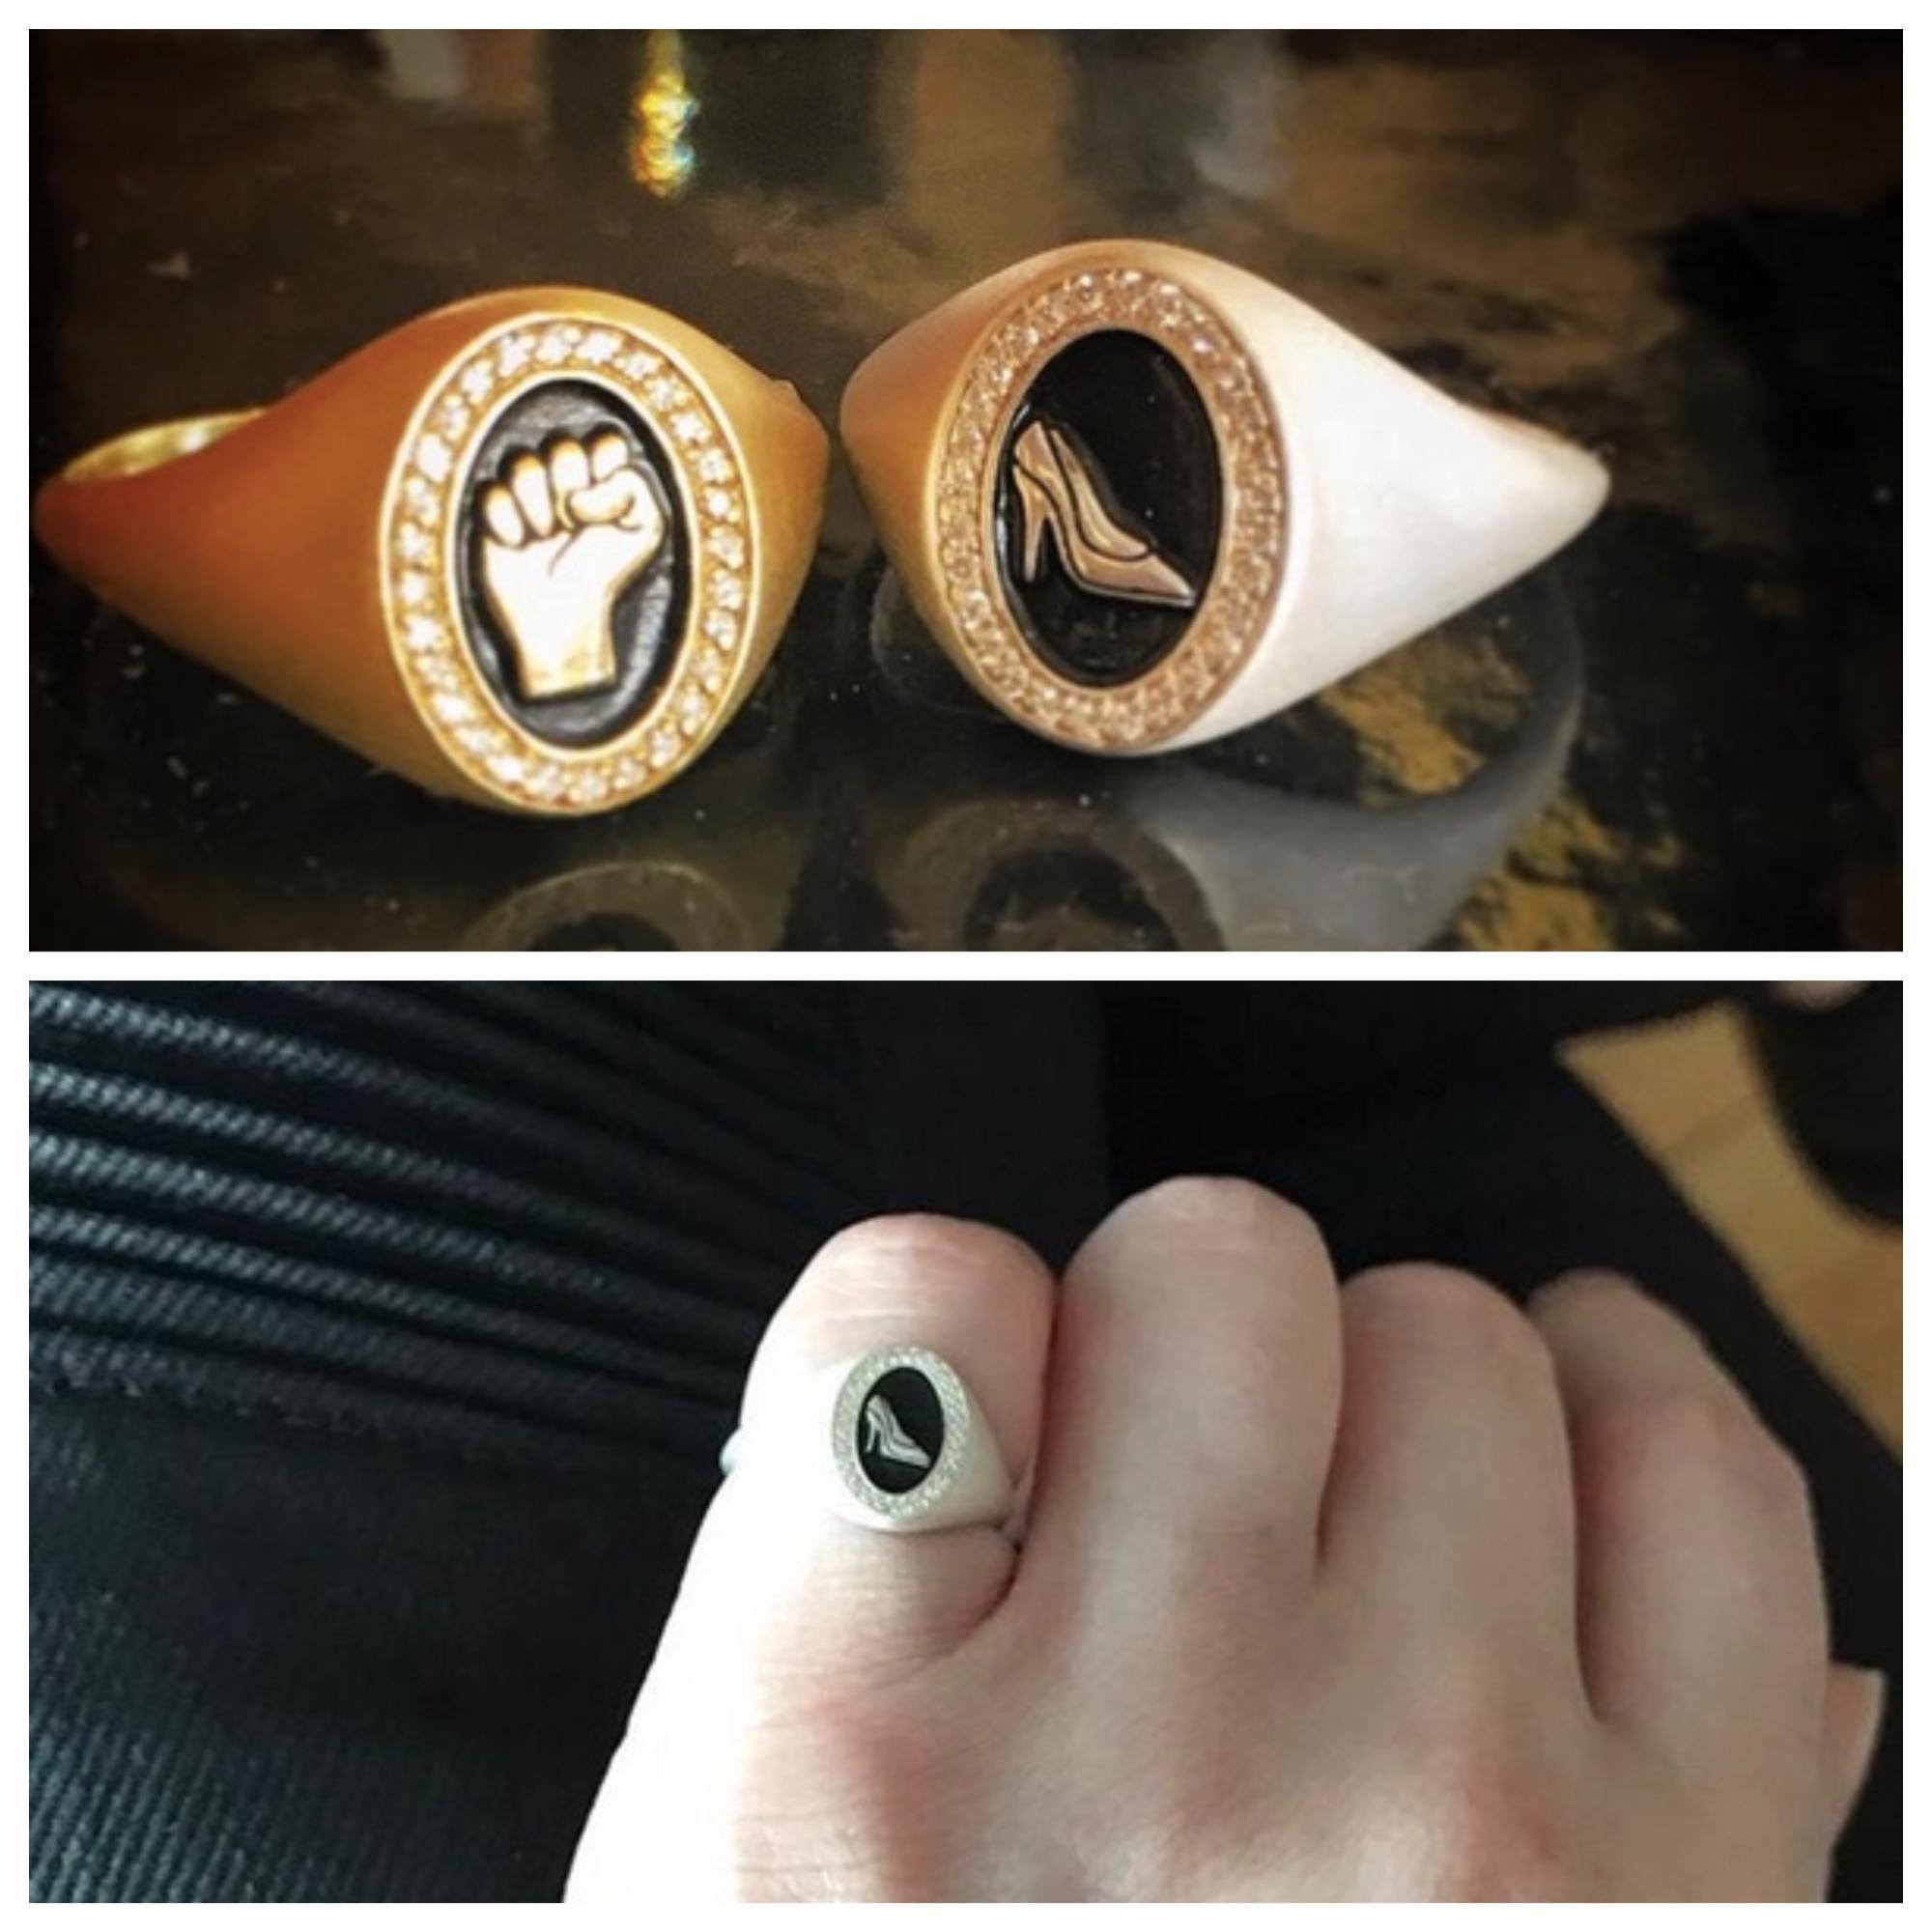 For Sale:  Wendy Brandes Petite Customizable 18K Gold Signet Ring With Symbol or Initial 8